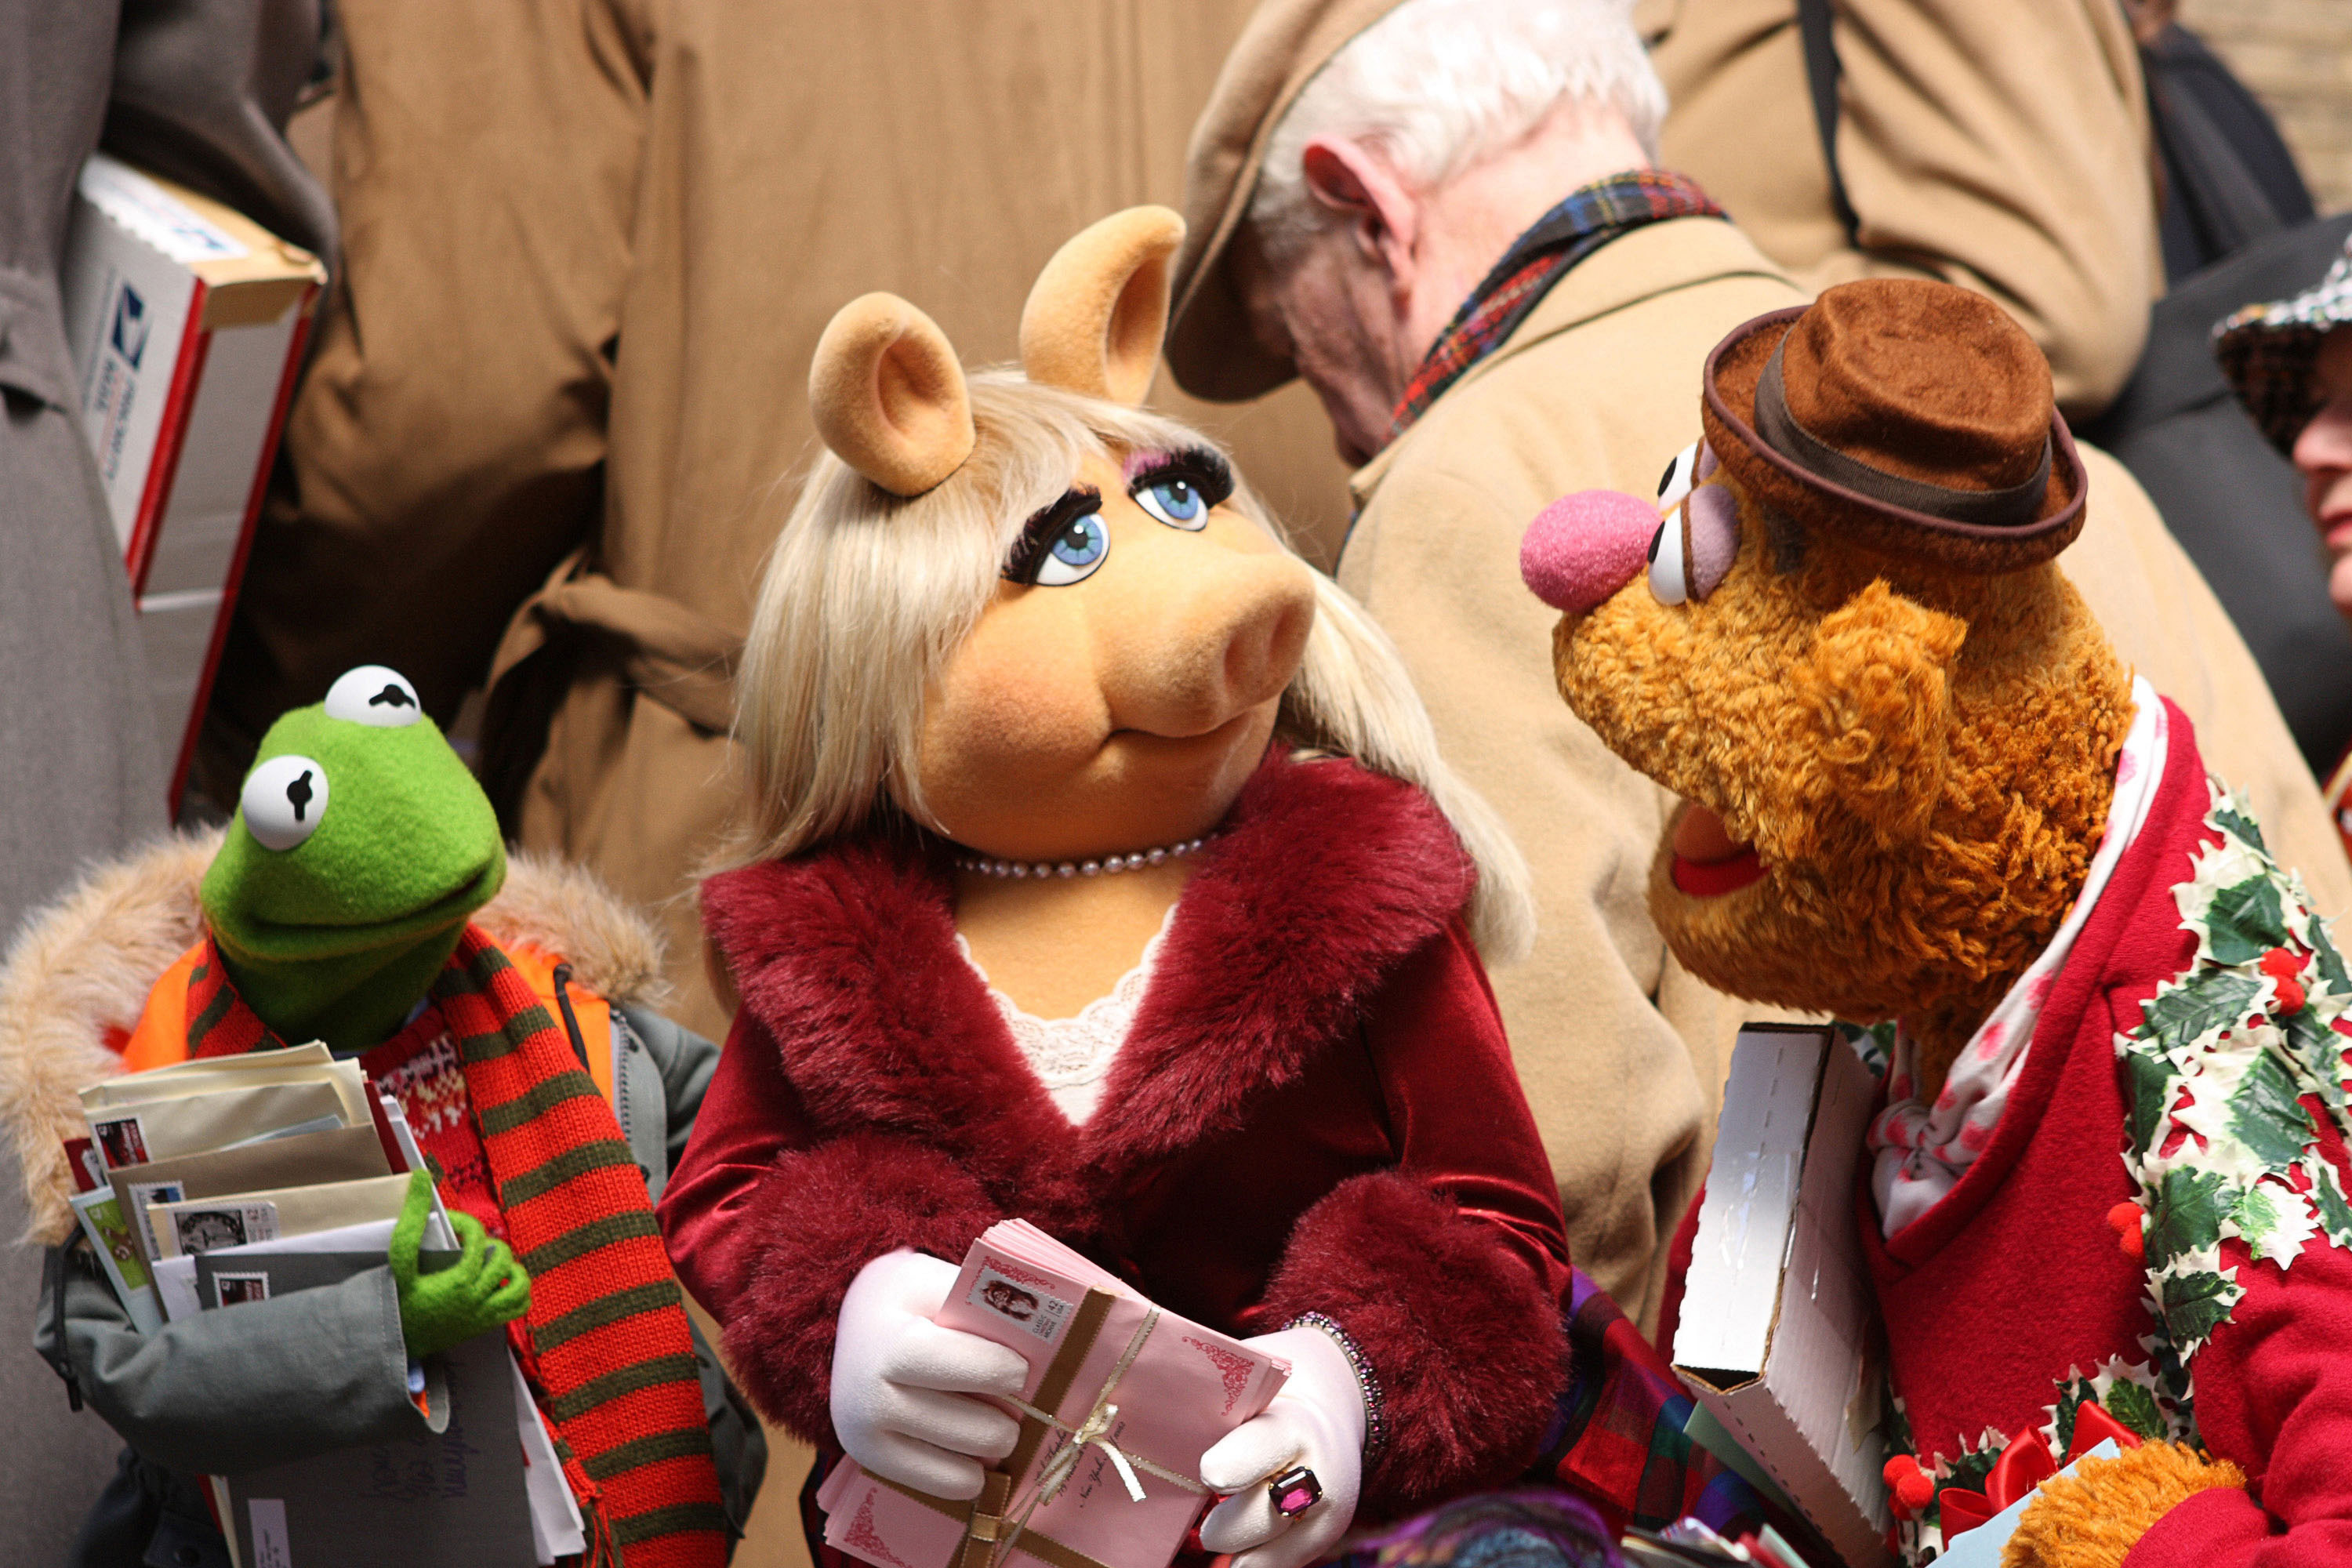 Kermit the Frog, Miss Piggy, and Fozzie Bear holding mail